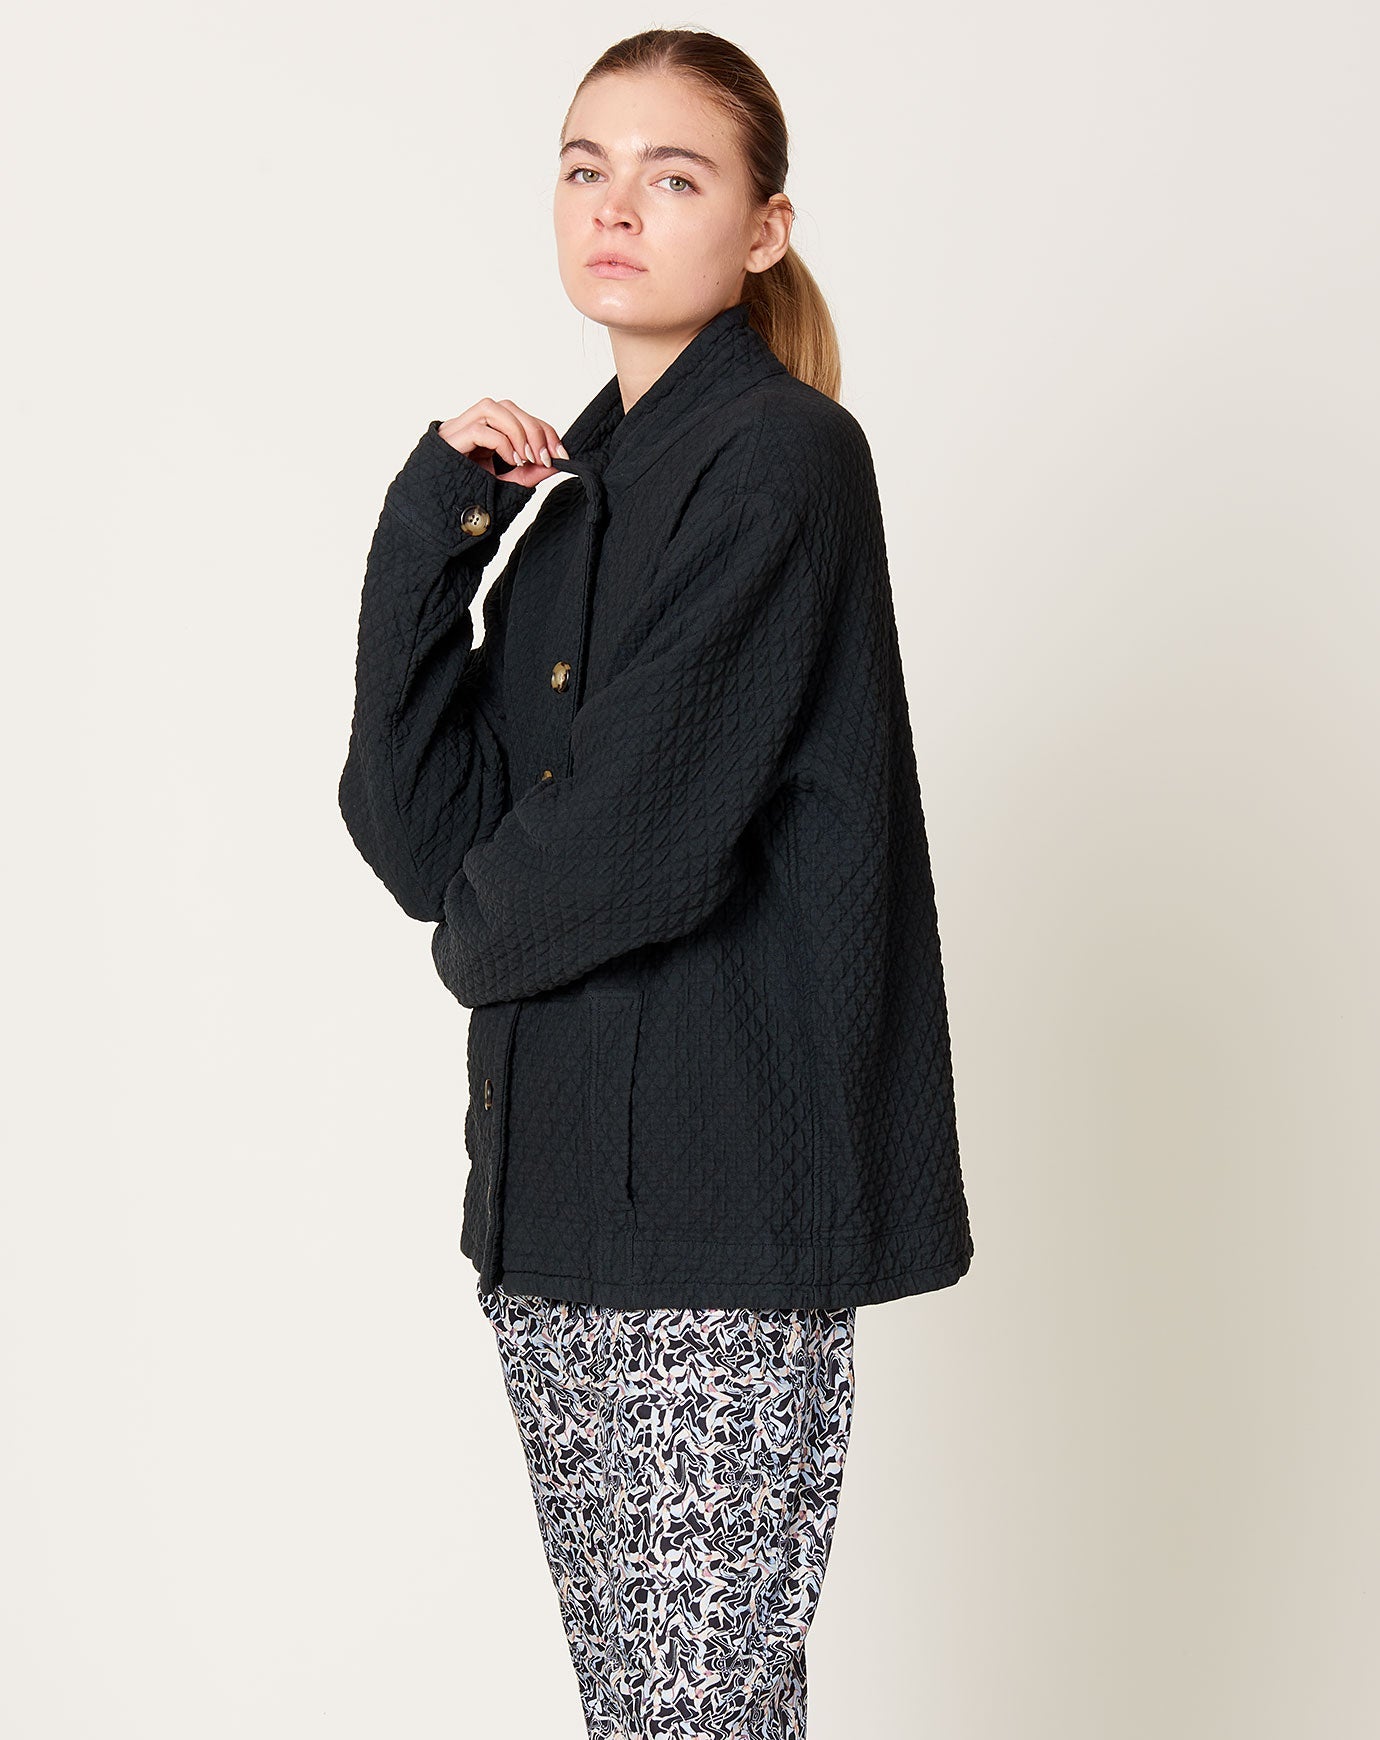 Covet Lou Raquel Covet | Quilted + | Lou Black + Jacket Allegra in |